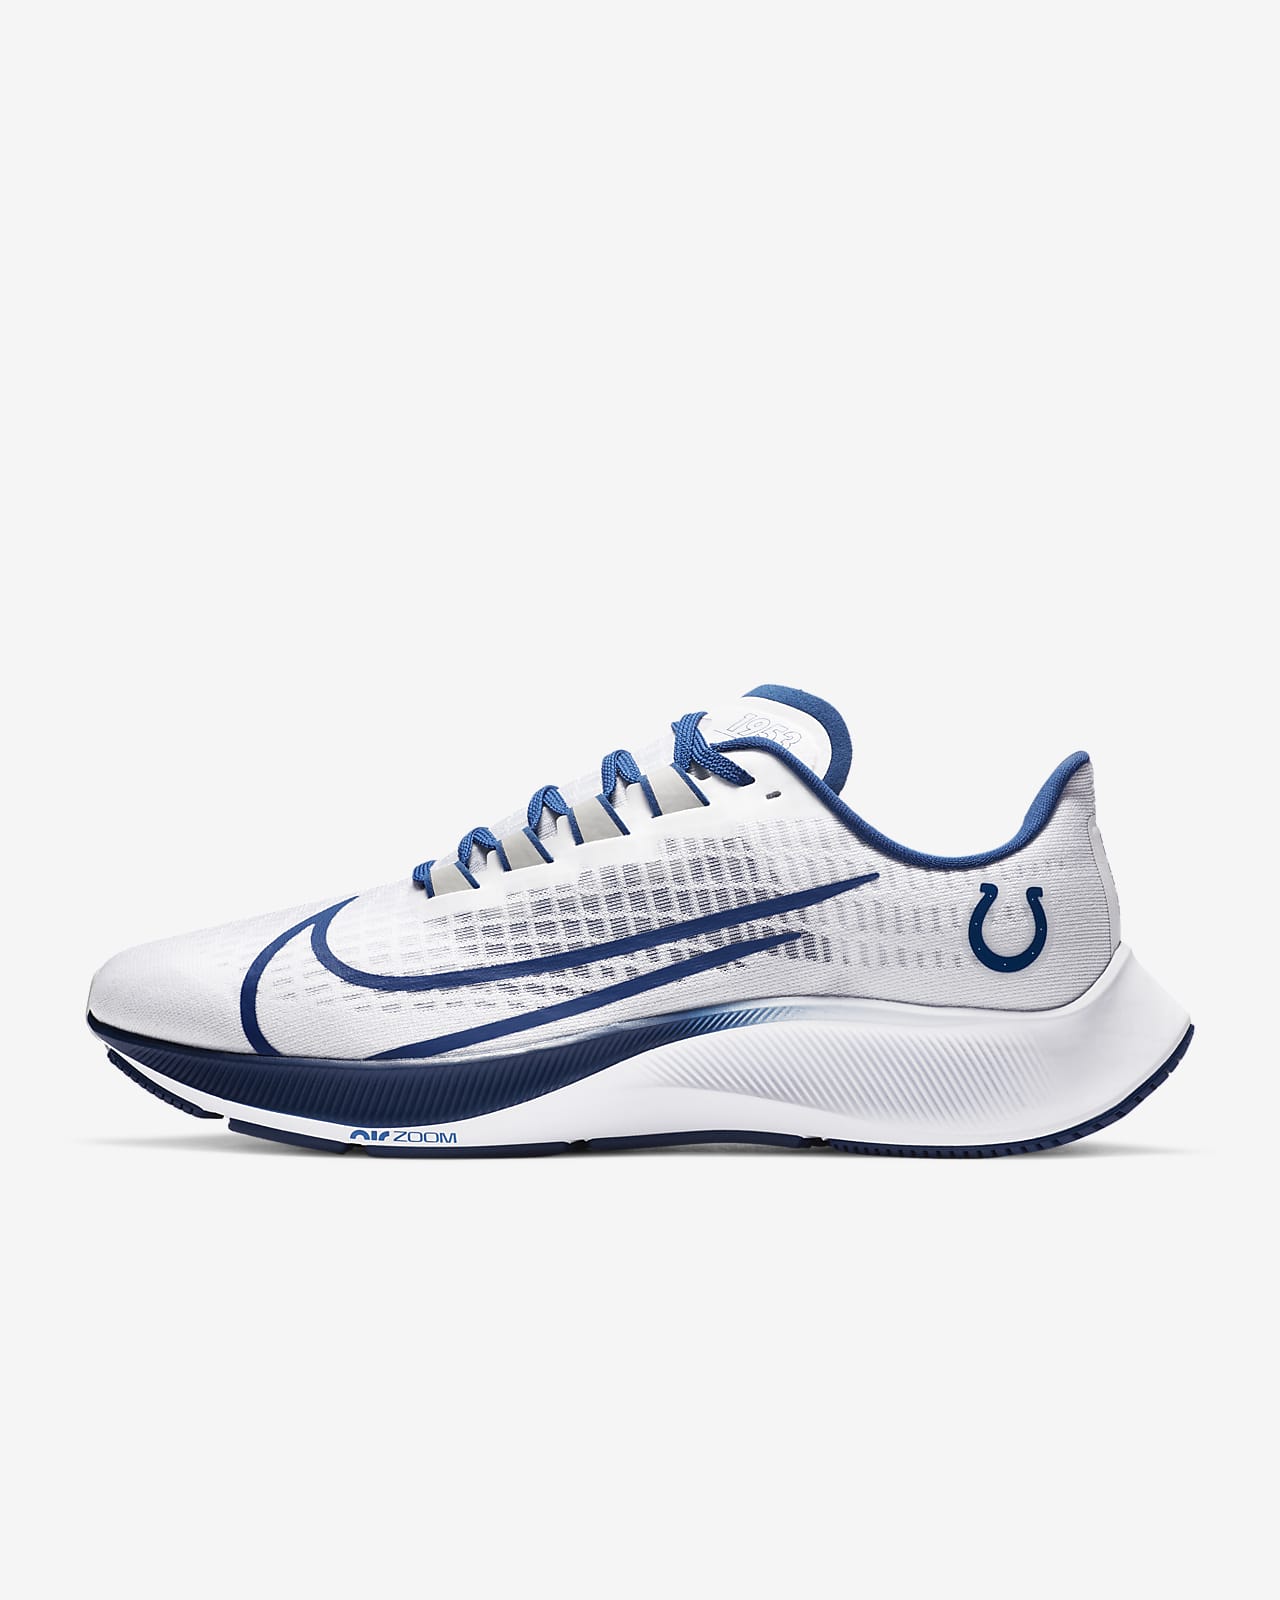 colts shoes nike